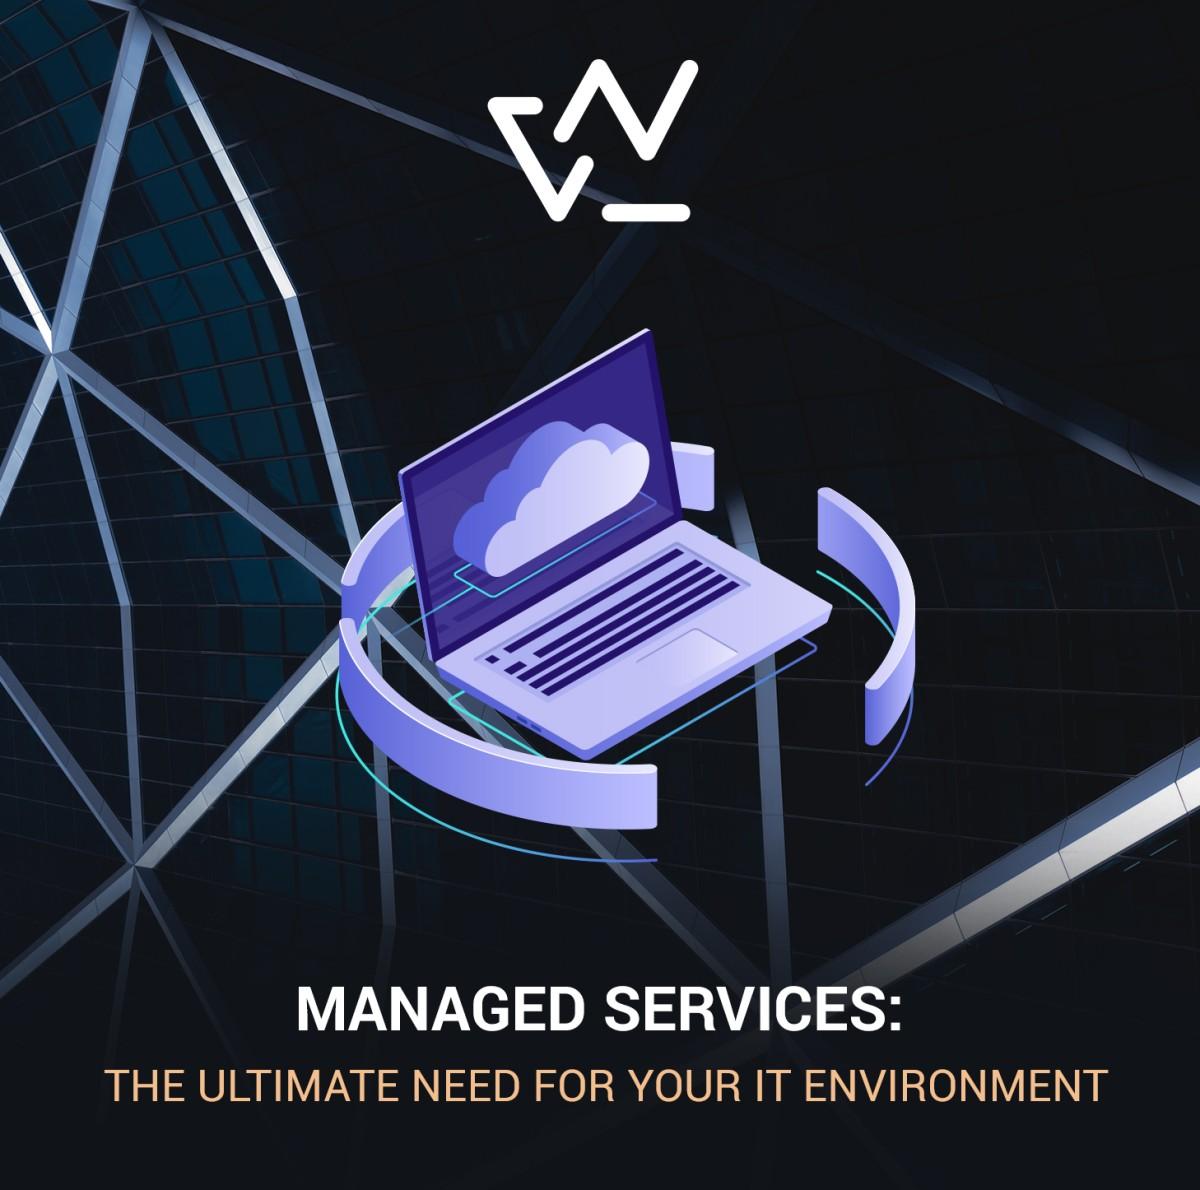 MANAGED SERVICES: THE ULTIMATE NEED FOR YOUR IT ENVIRONMENT